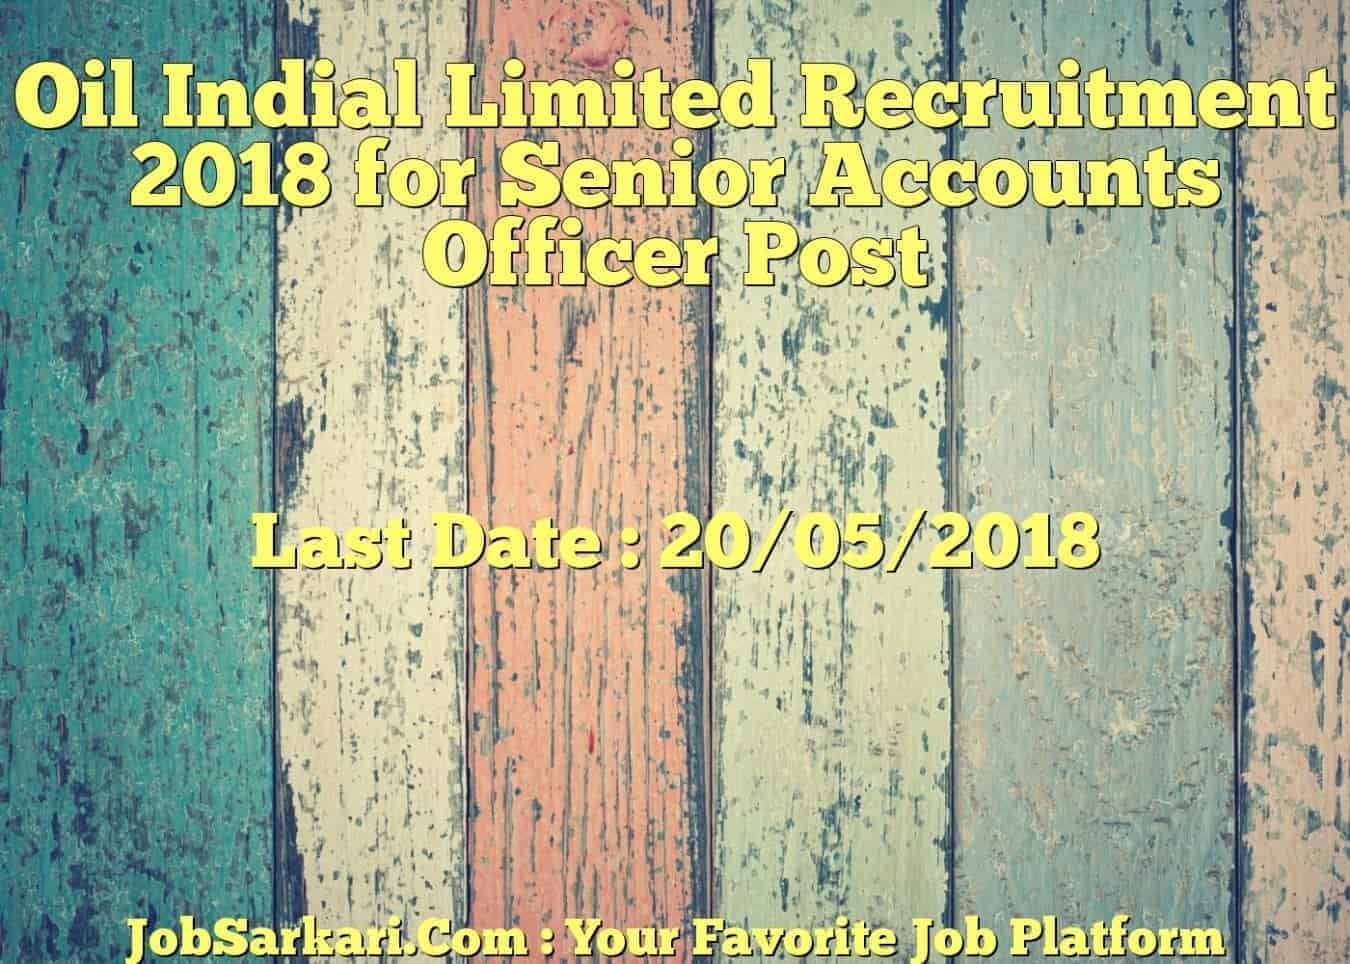 Oil Indial Limited Recruitment 2018 for Senior Accounts Officer Post